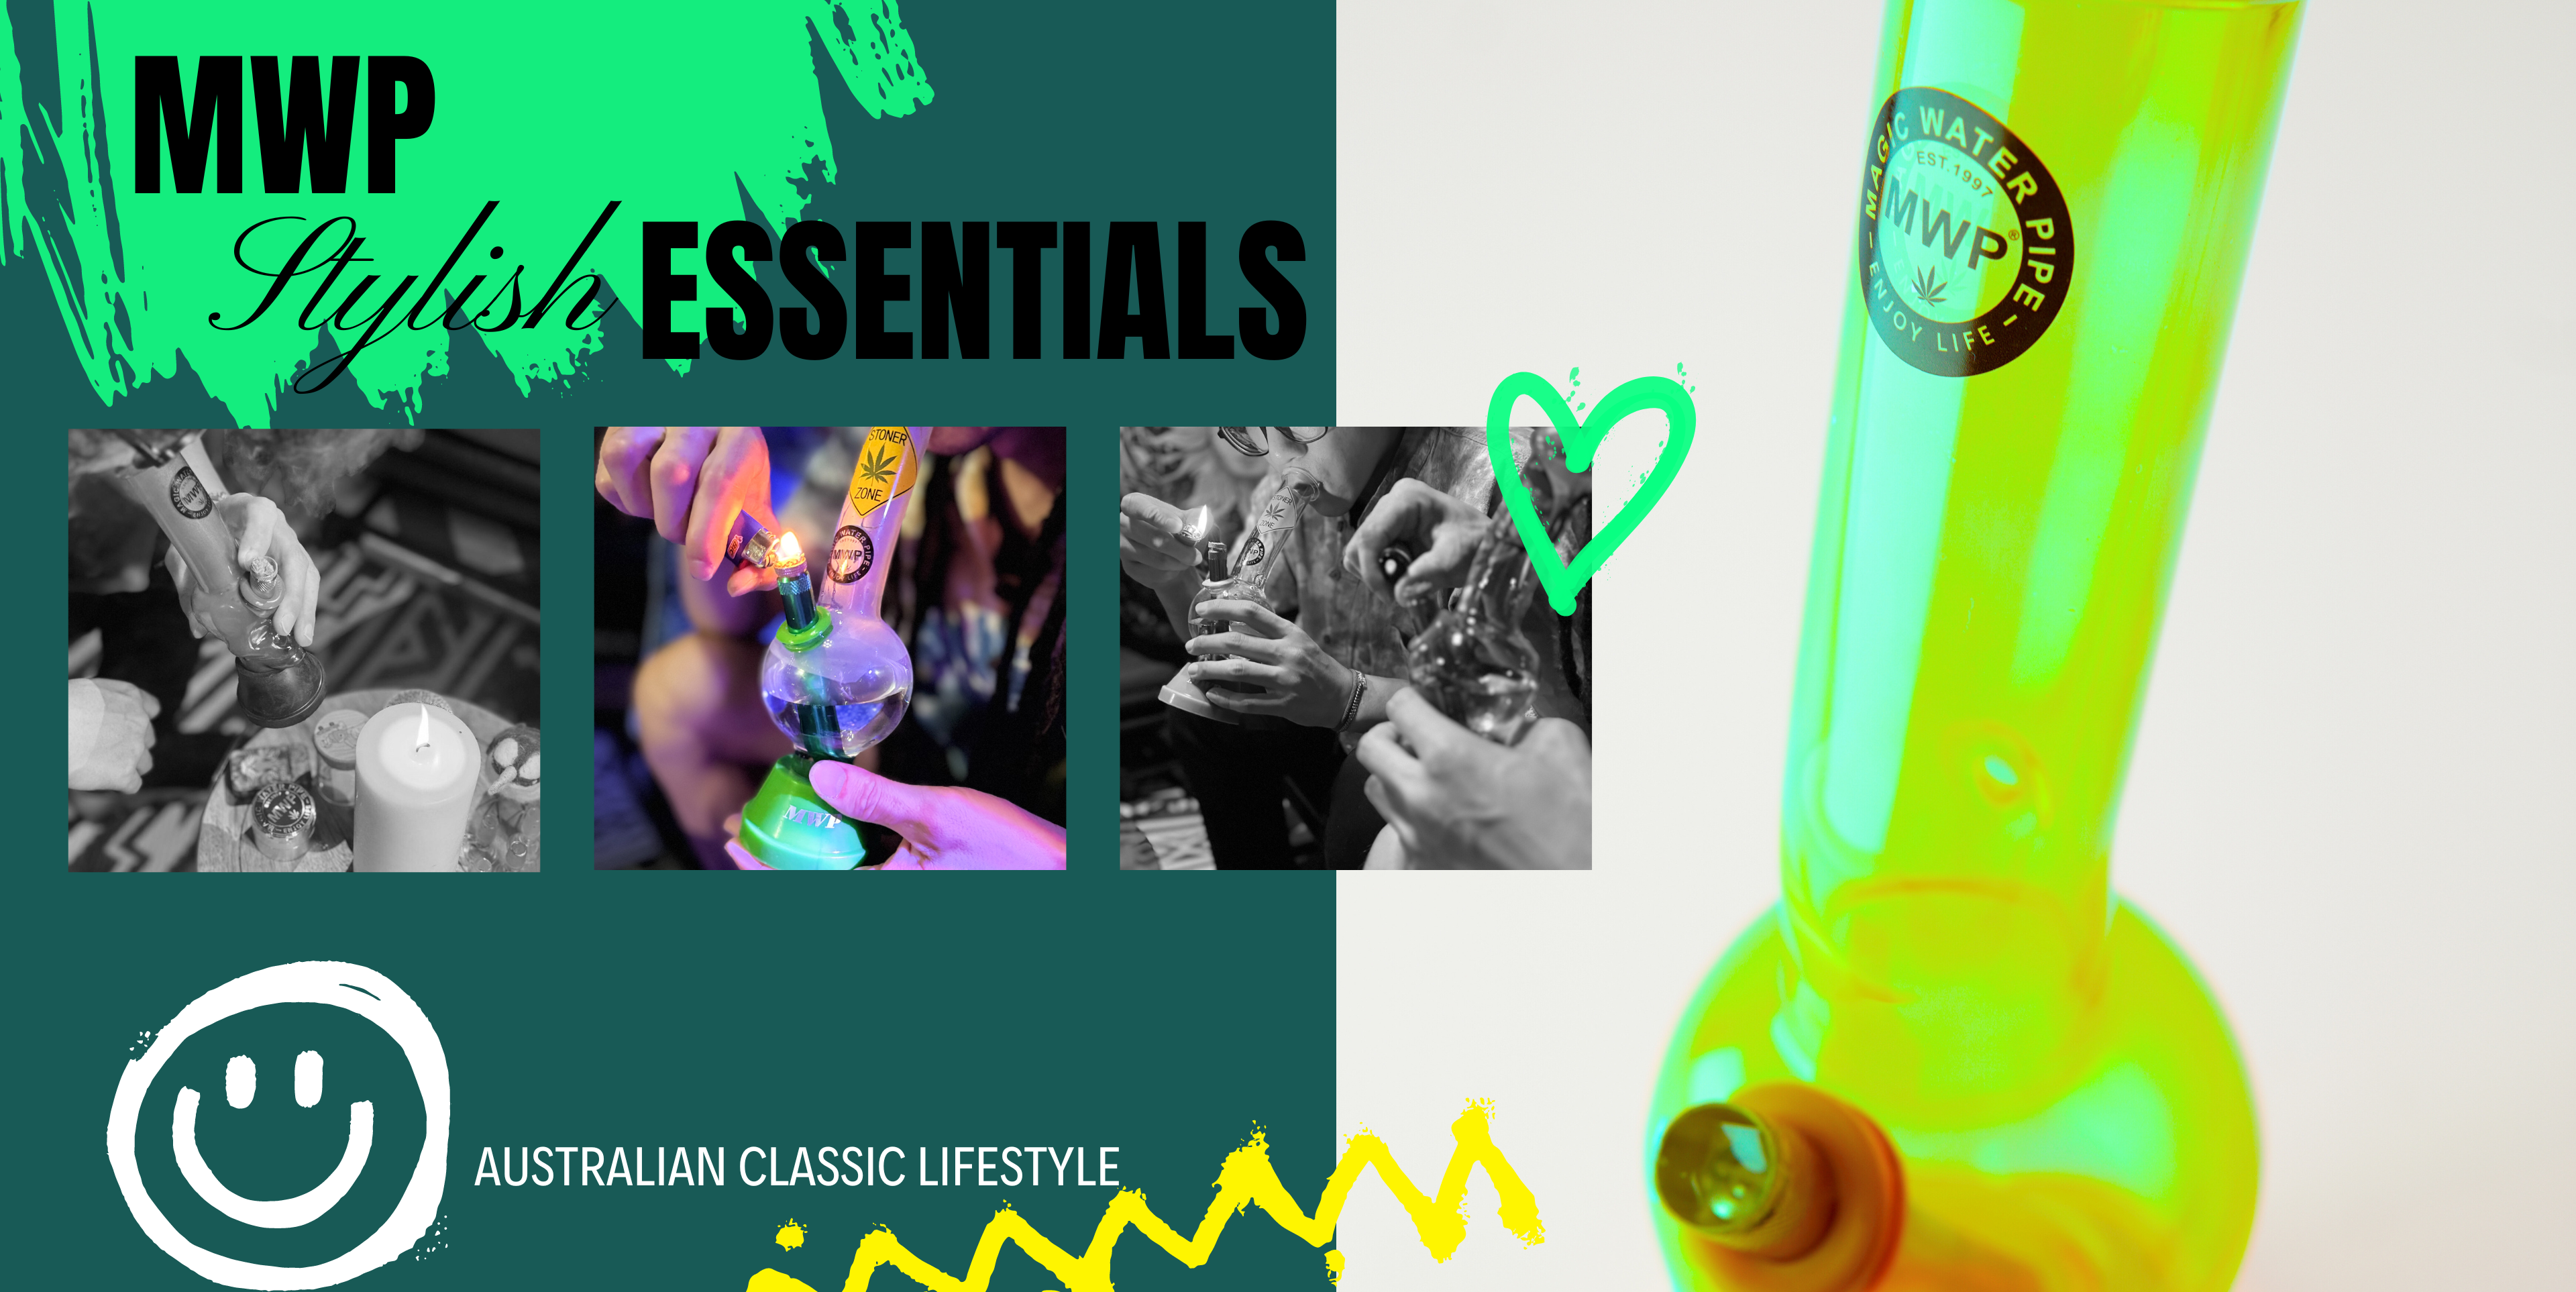 MWP bongs stylish essentials banner featuring bongs